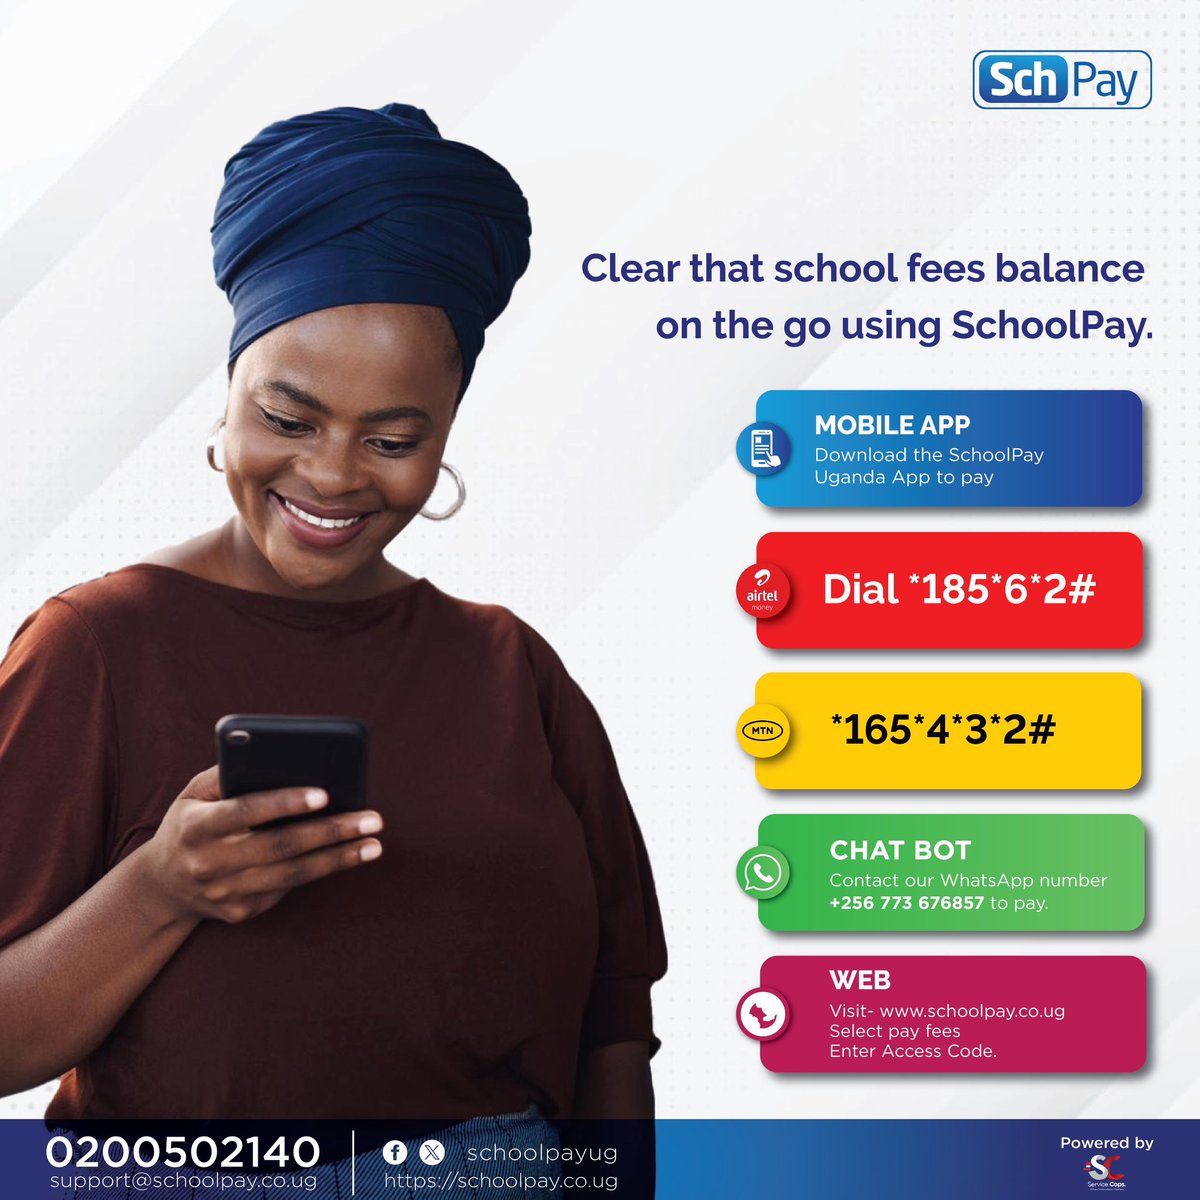 As term 1 is coming to an end, pay your child’s school Fees Balance on the go from wherever you are. #PaySchoolFeesBalance #SchoolPay